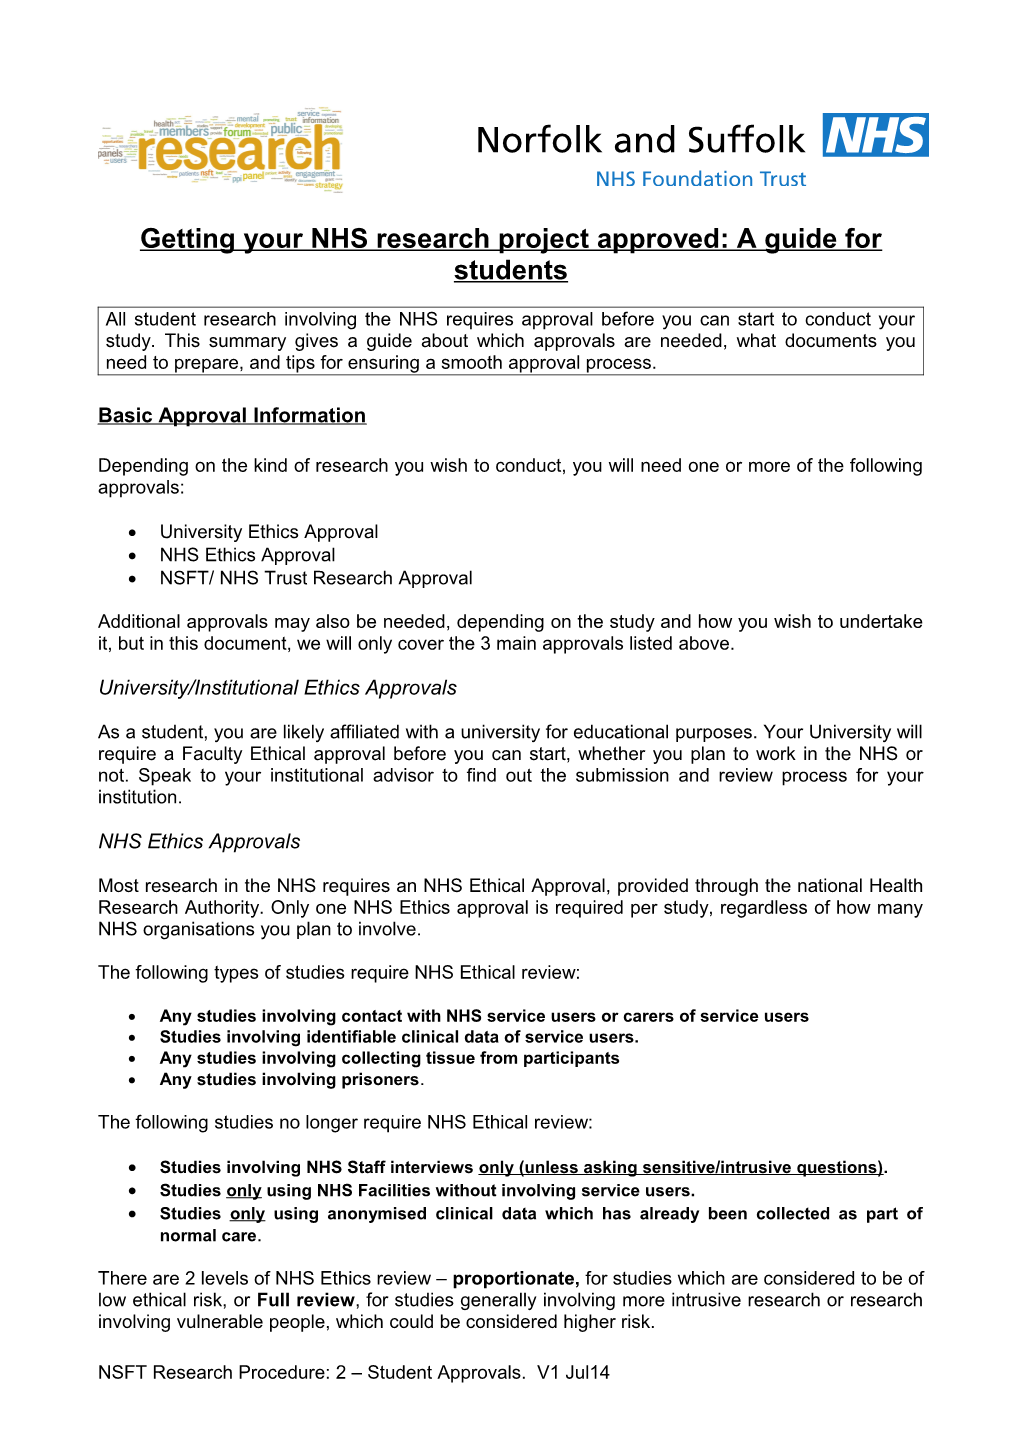 Getting Your NHS Research Project Approved: a Guide for Students